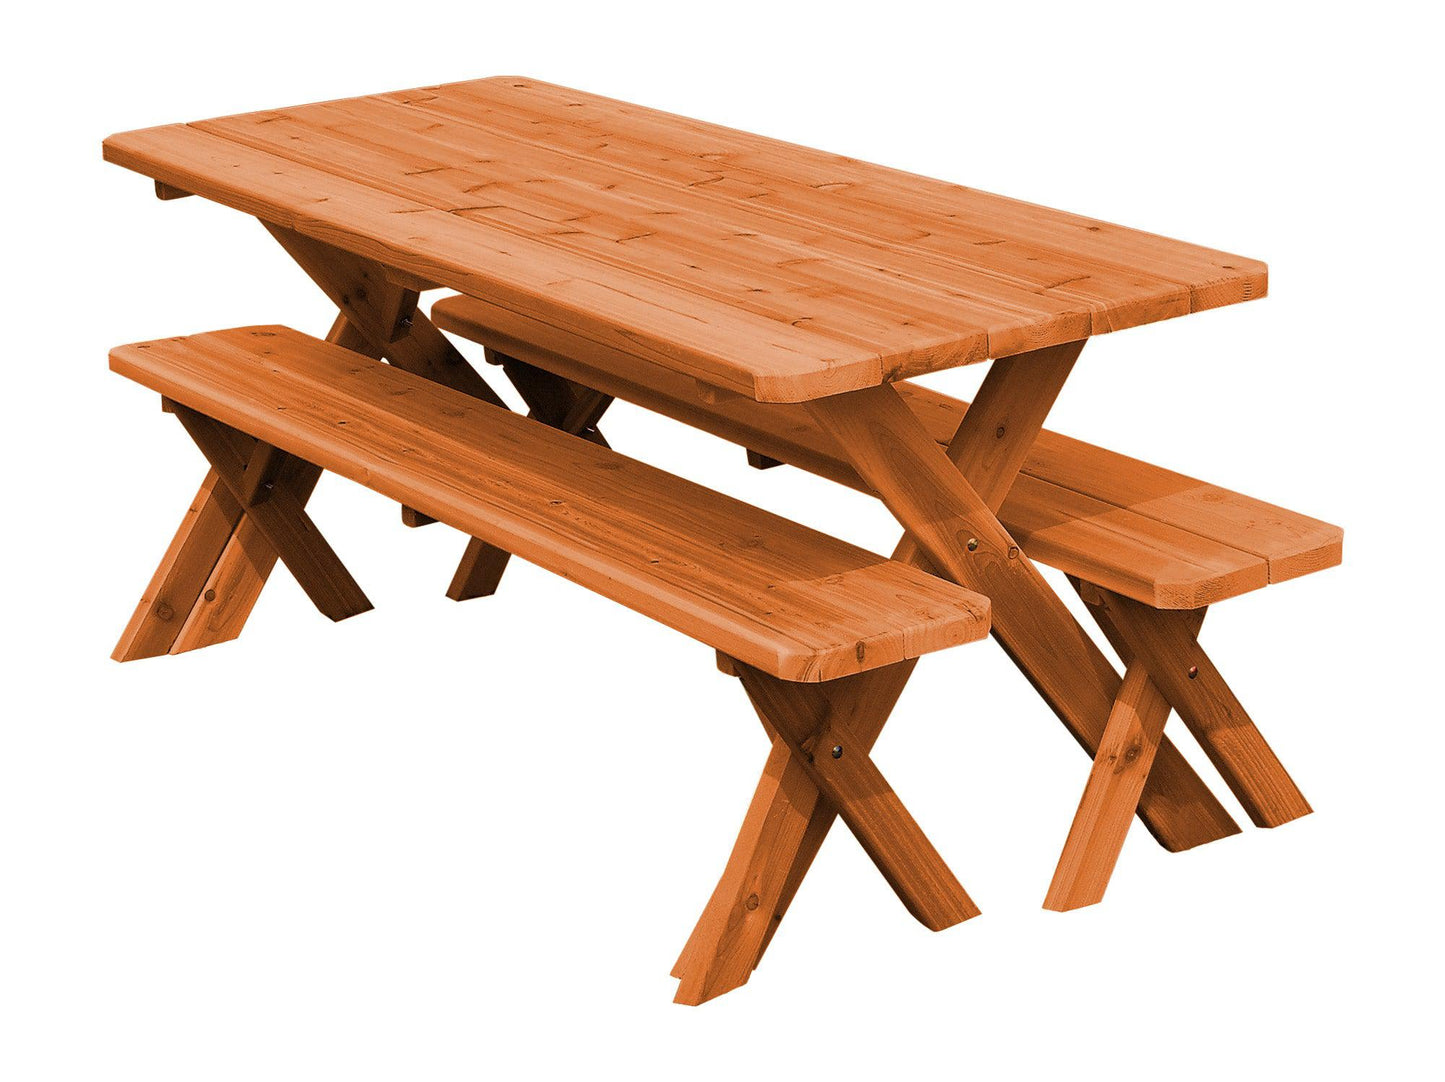 A&L FURNITURE CO. Western Red Cedar 8' Cross-leg Picnic Table w/4  4' Benches - Specify for FREE 2" Umbrella Hole - LEAD TIME TO SHIP 4 WEEKS OR LESS